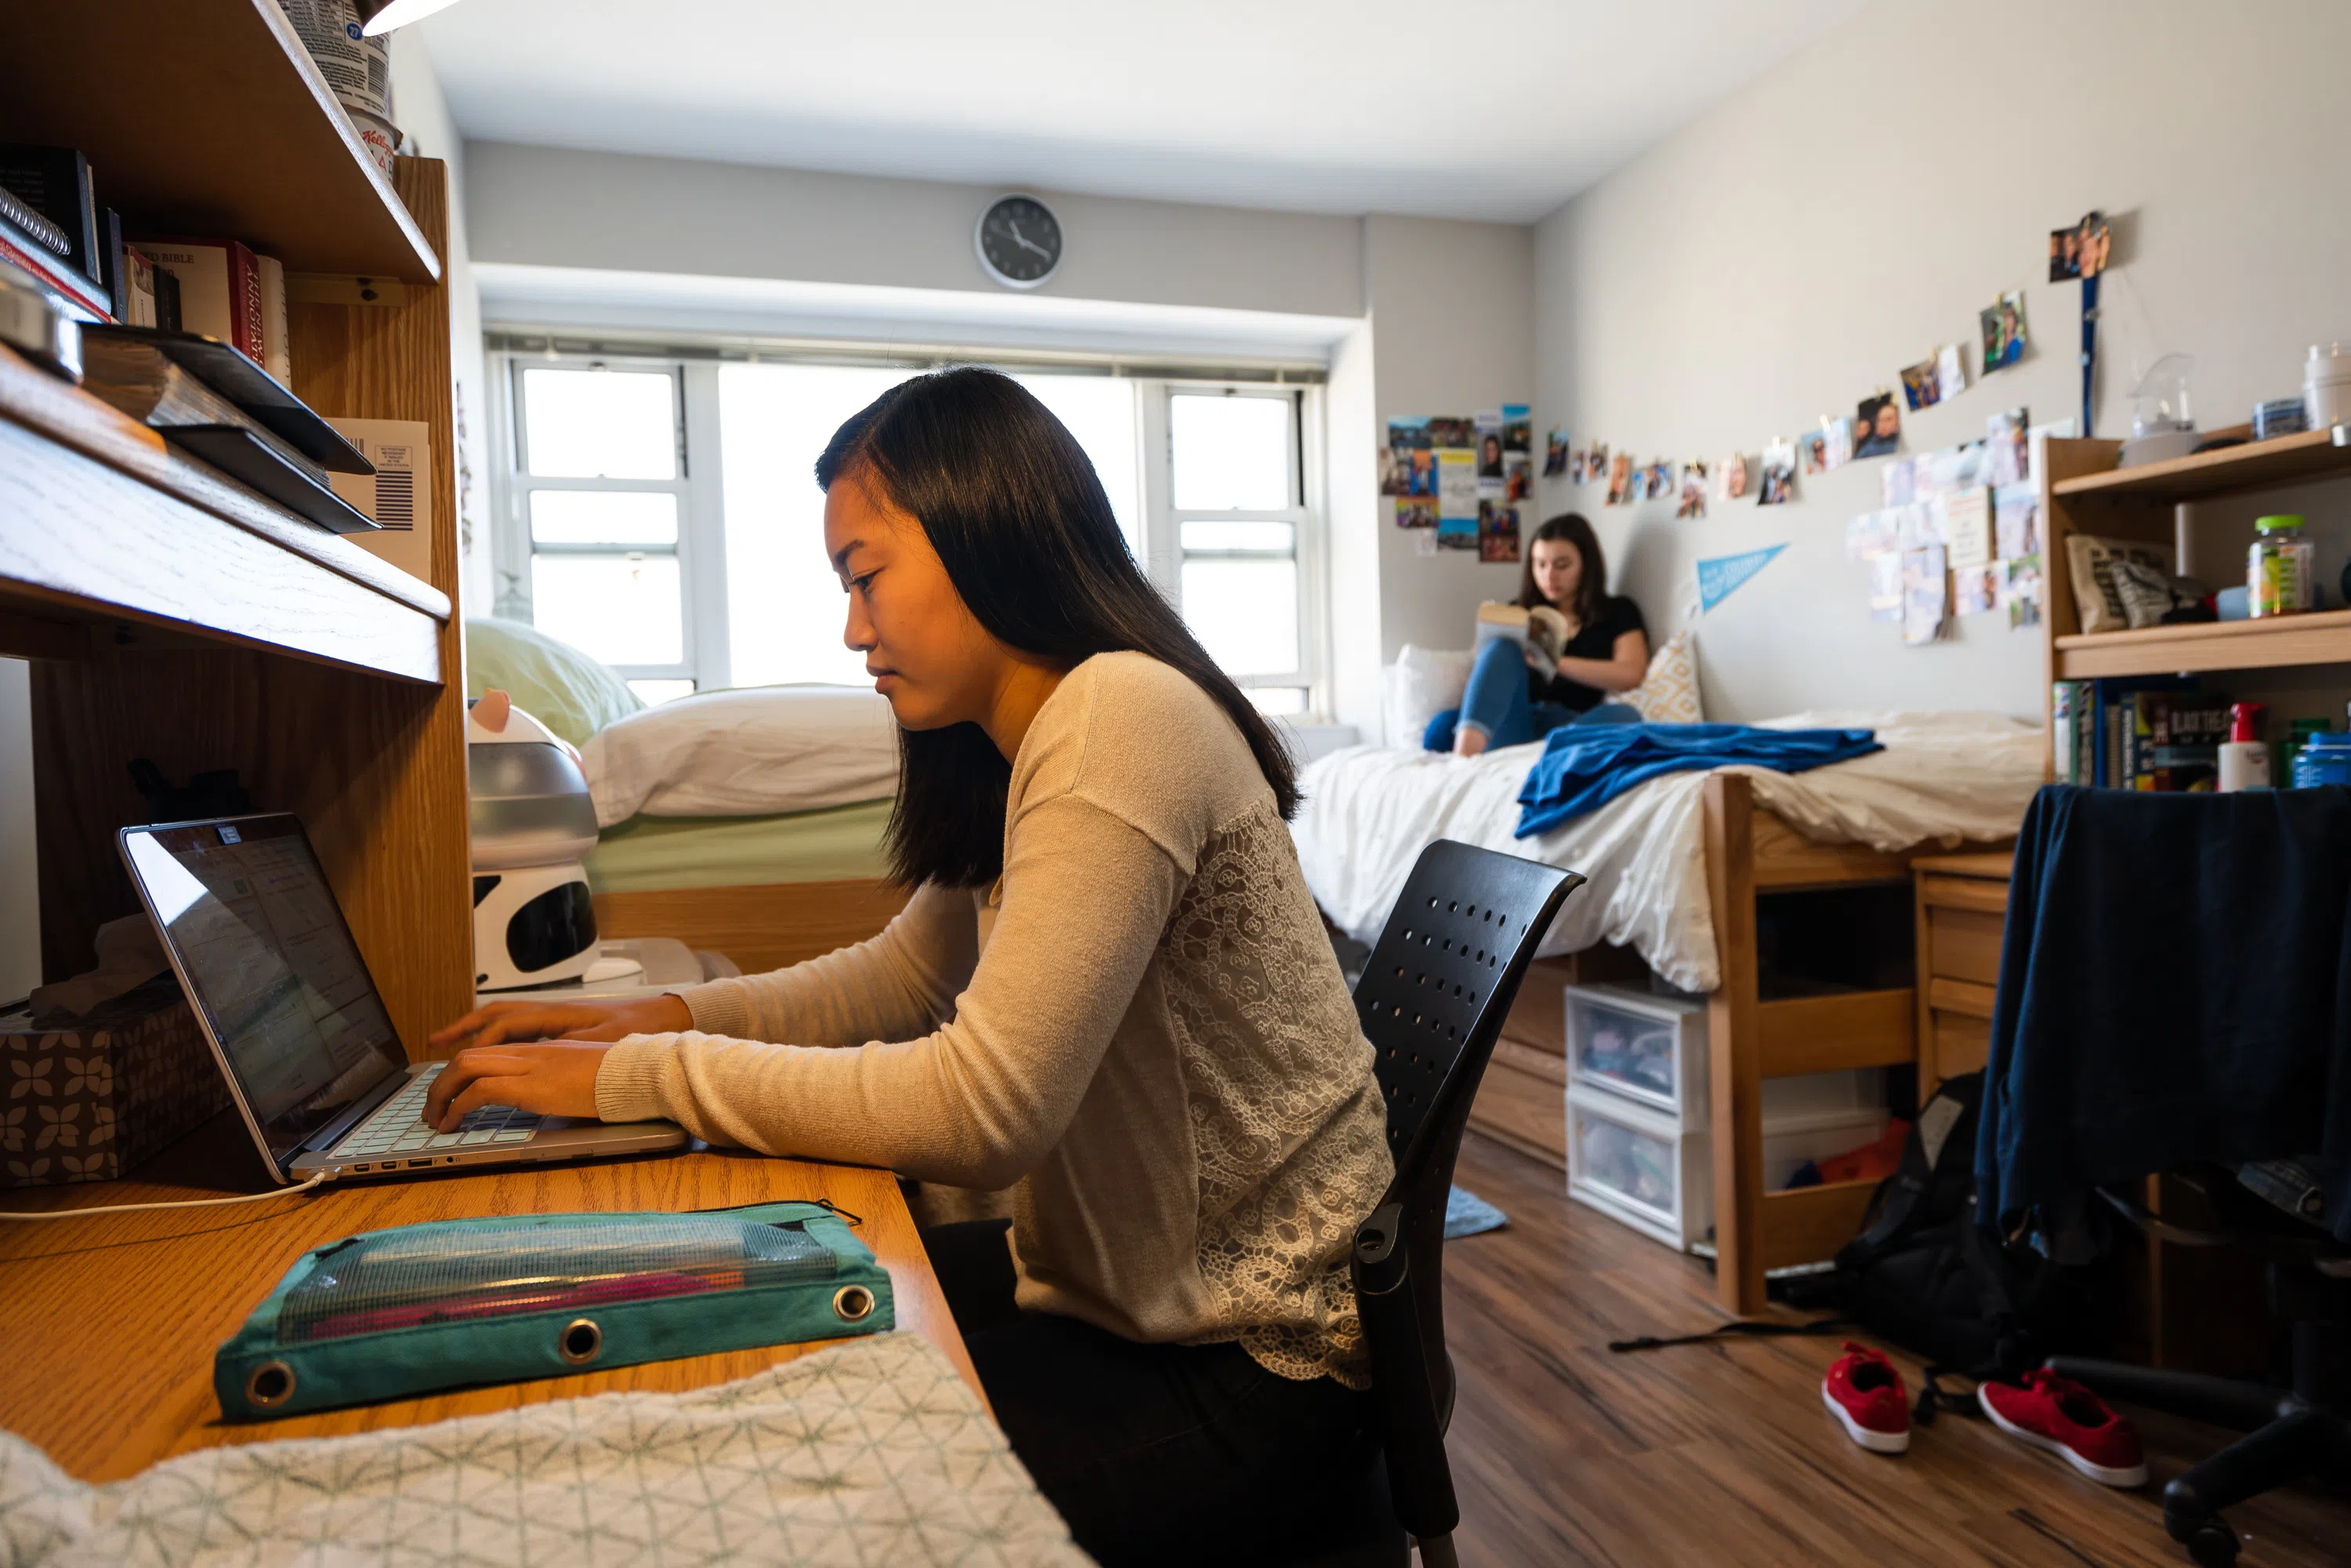 Two female students sit in a dorm room, one sits at her desk while the other is on the bed, both are studying.